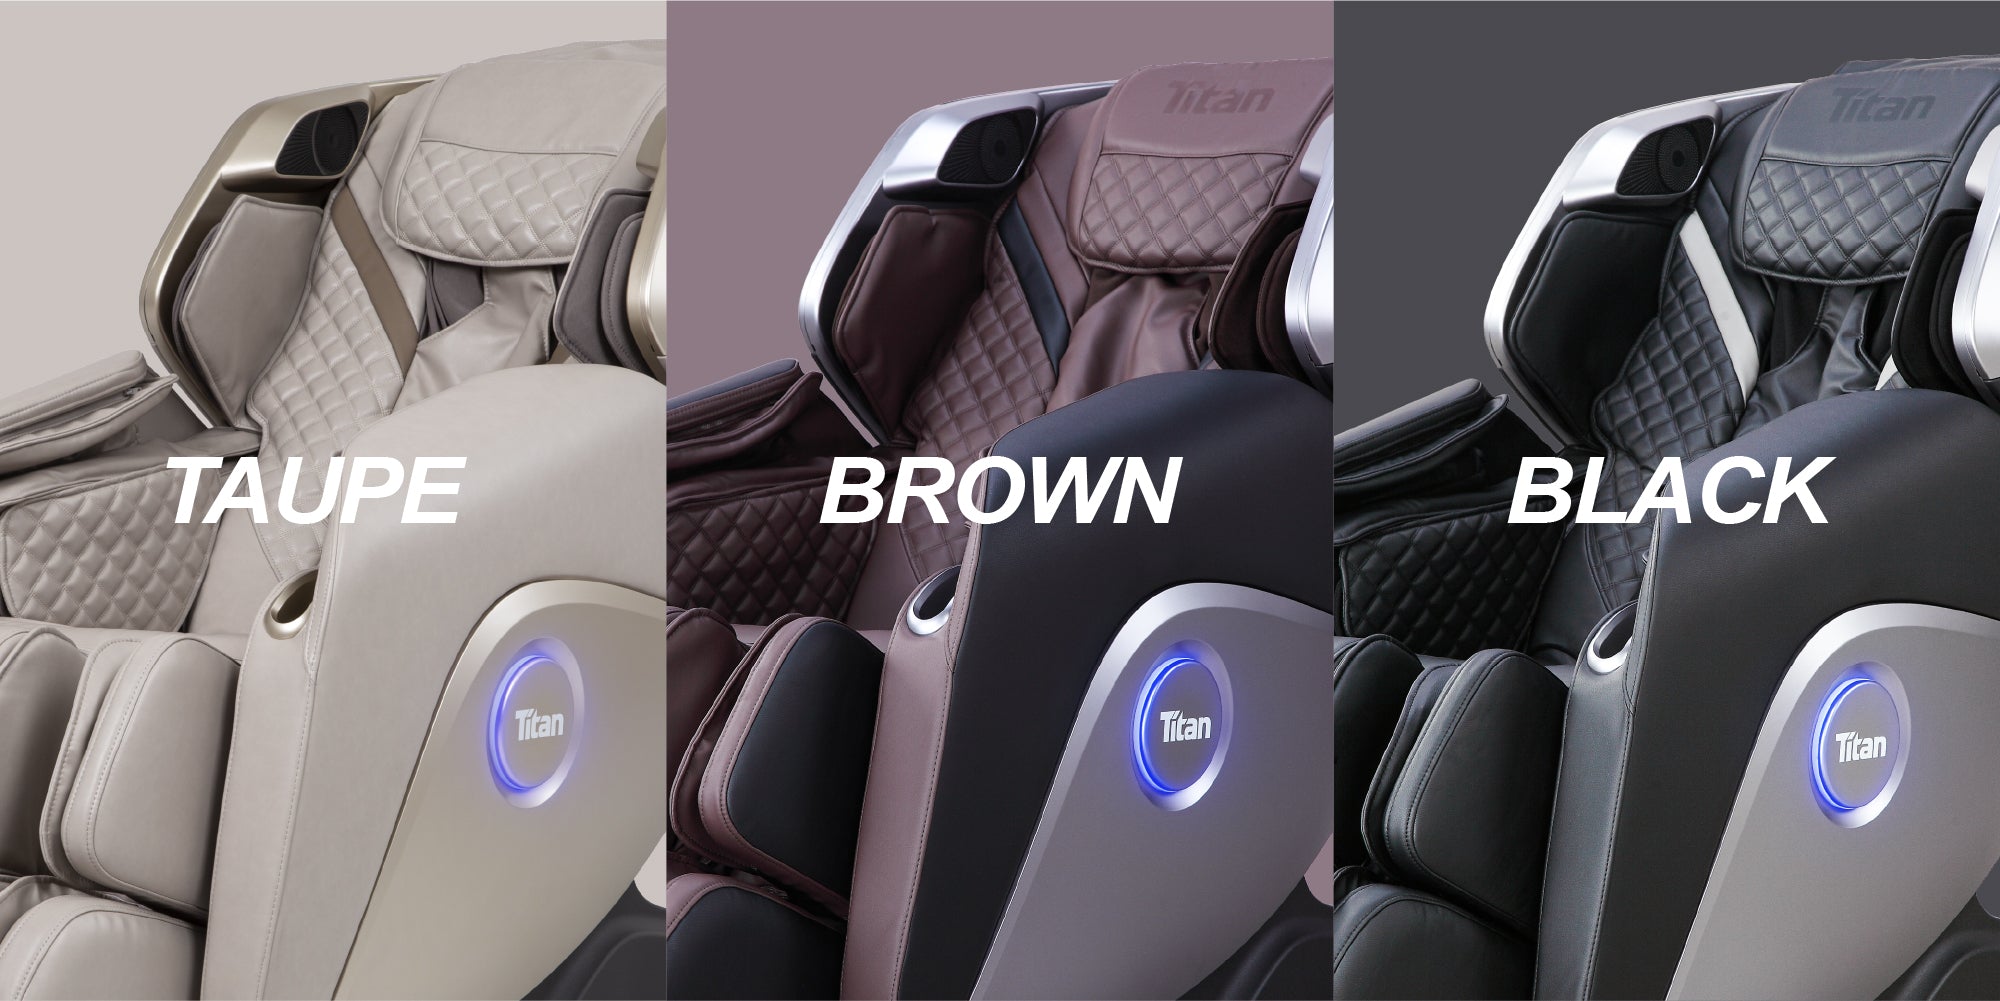 Titan Elite 3D Massage Chair - Taupe, Brown and Black colors